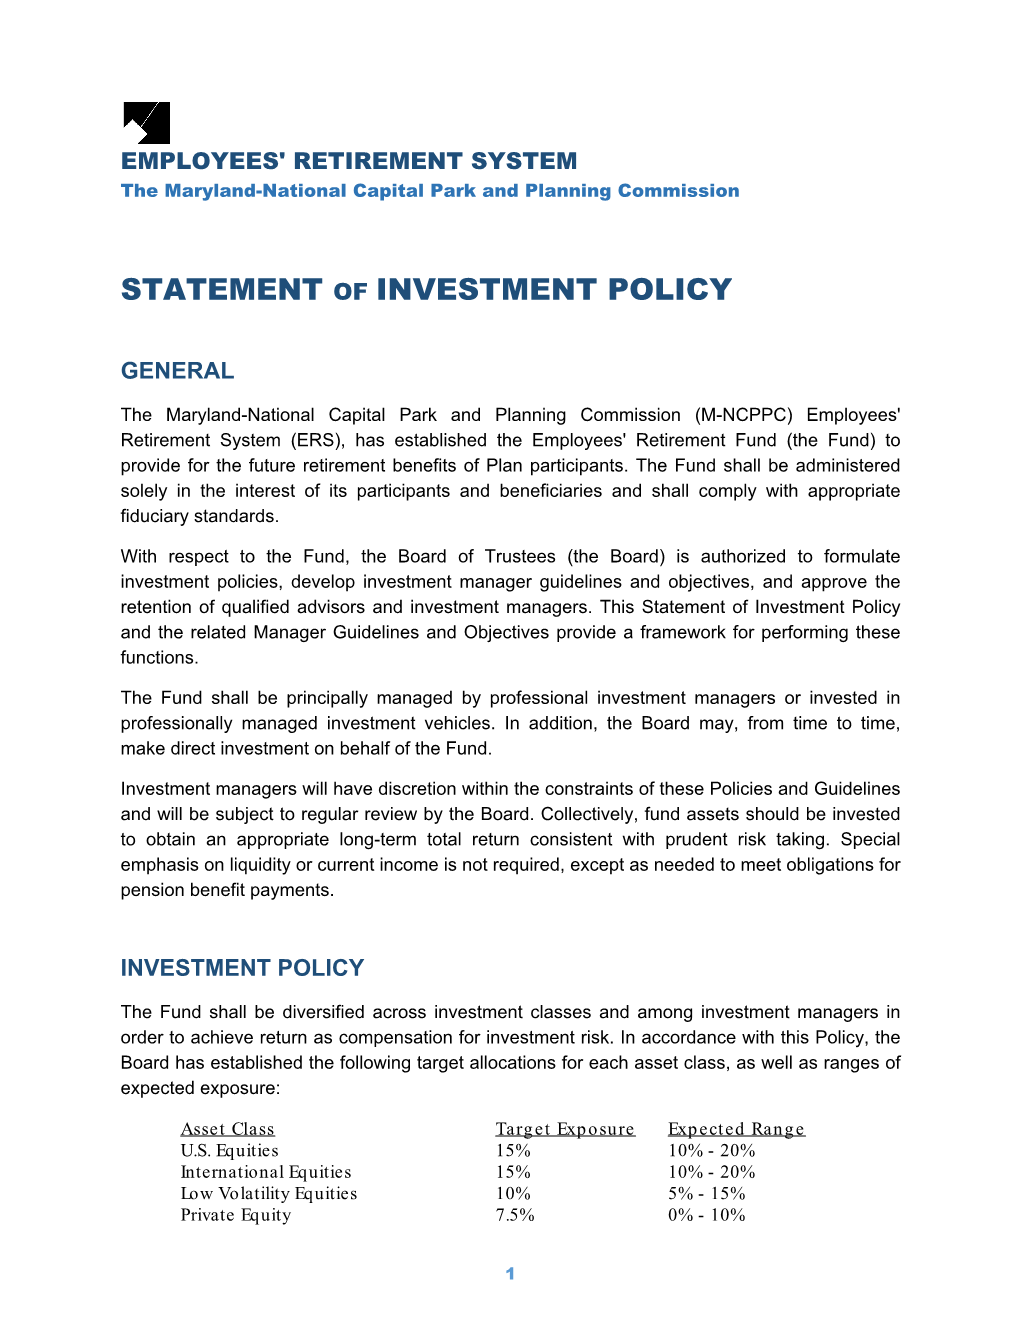 Statement of Investment Policy